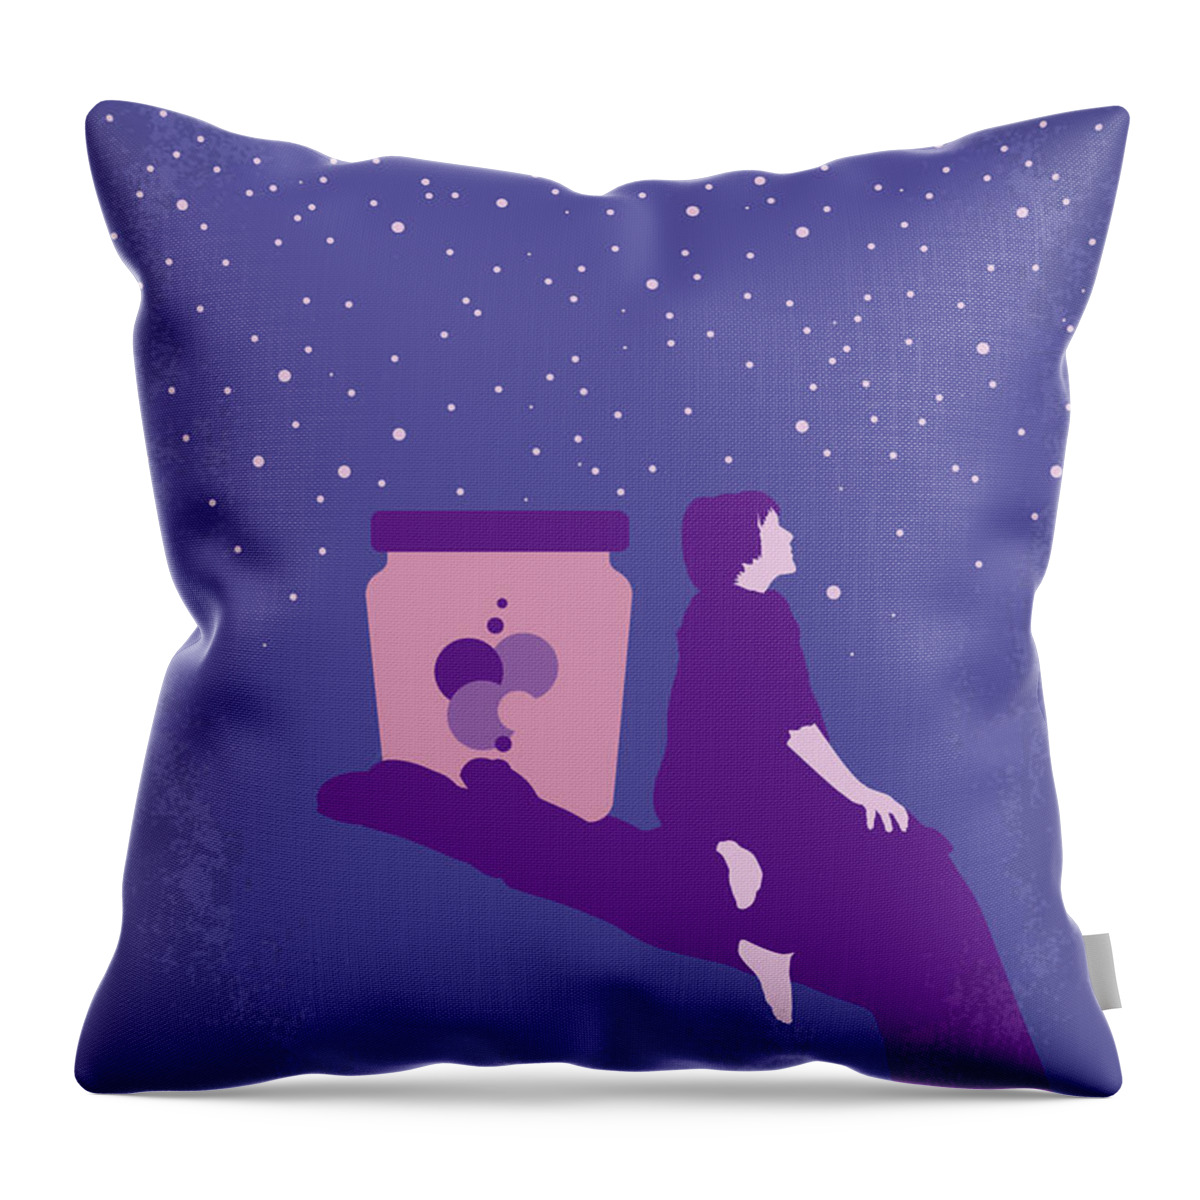 The Bfg Throw Pillow featuring the digital art No1242 My The BFG minimal movie poster by Chungkong Art